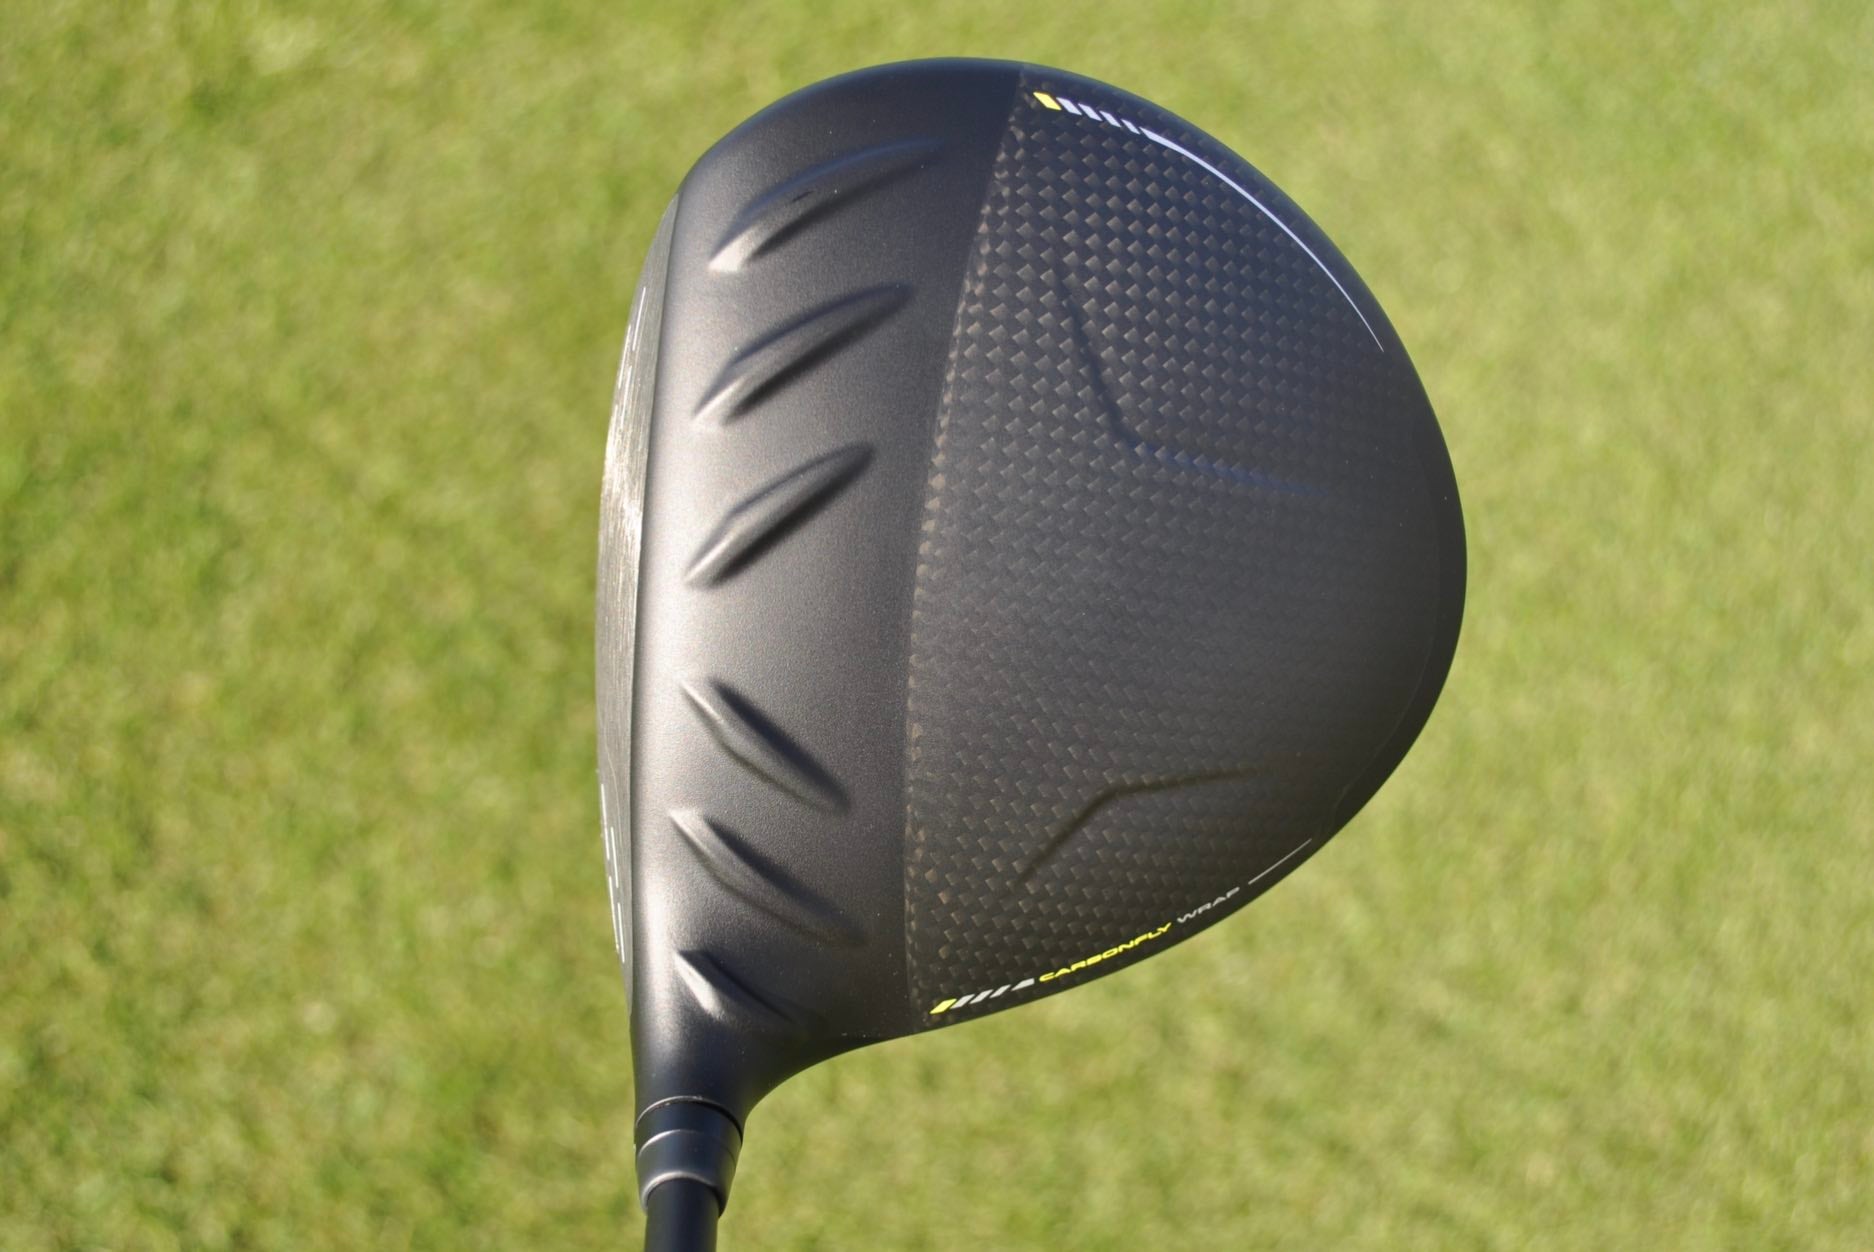 Ping's G430 MAX 10K driver: 4 things you need to know